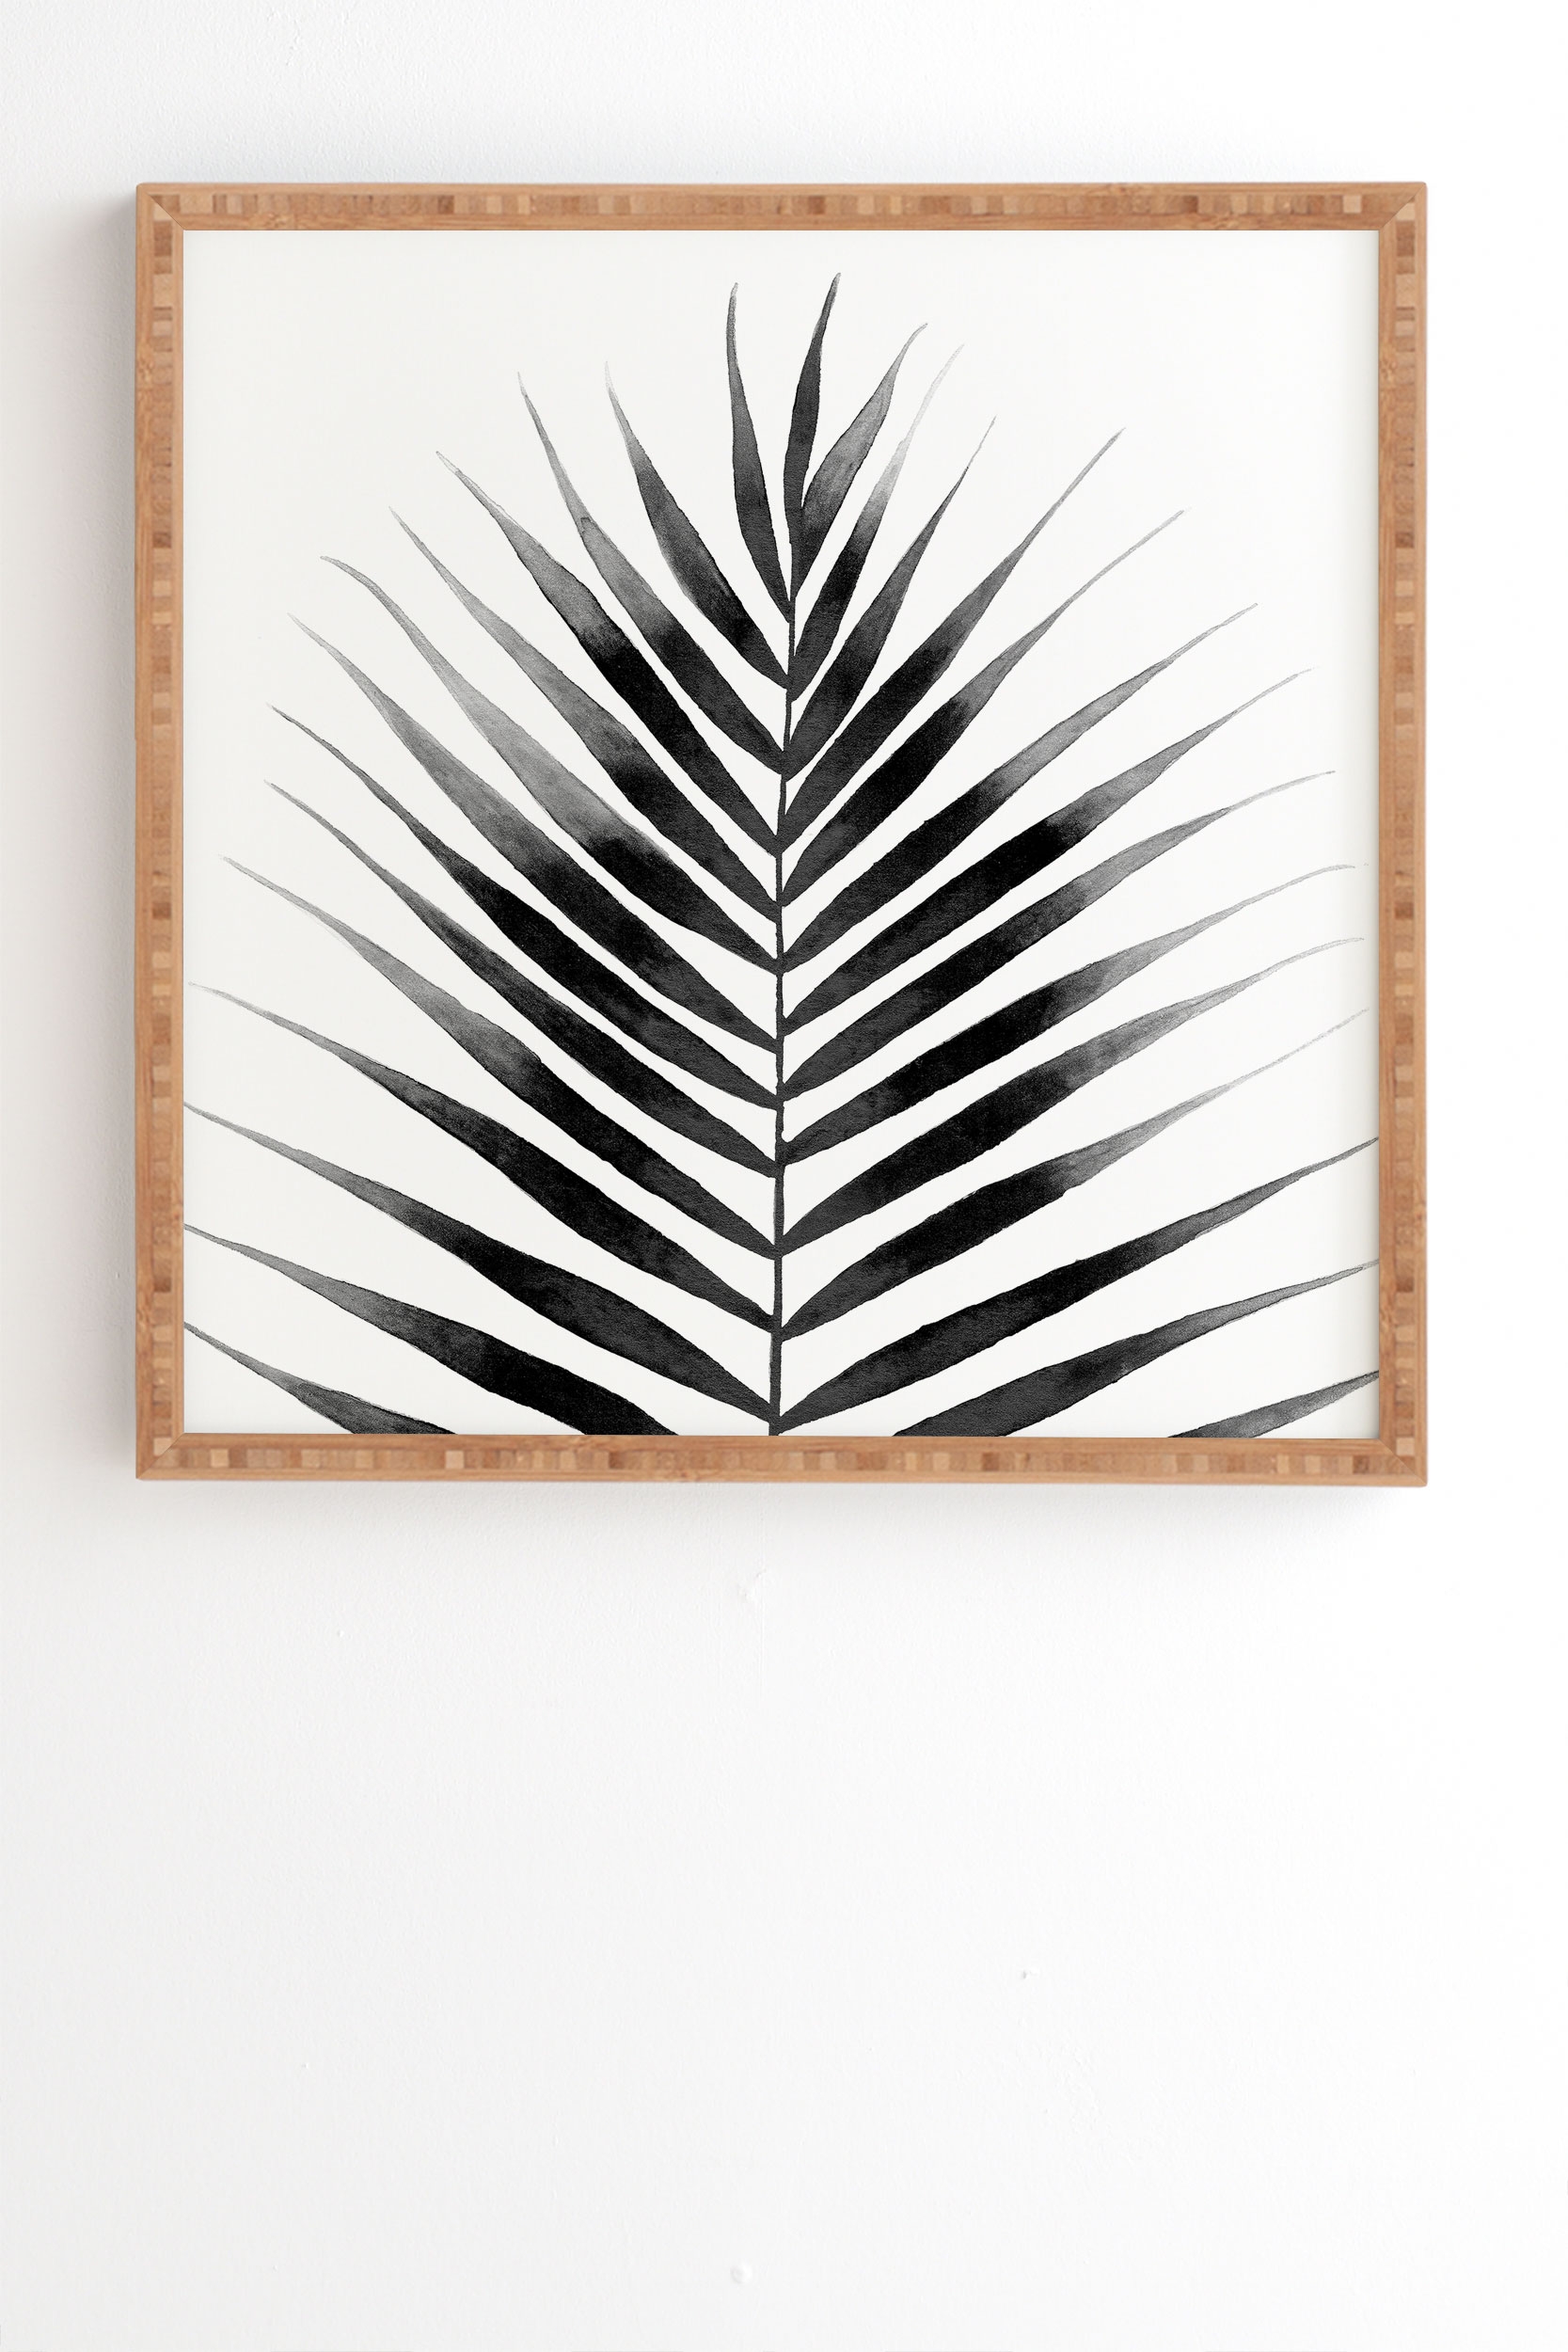 Palm Leaf Watercolor Black And White by Kris Kivu - Framed Wall Art Bamboo 11" x 13" - Image 1